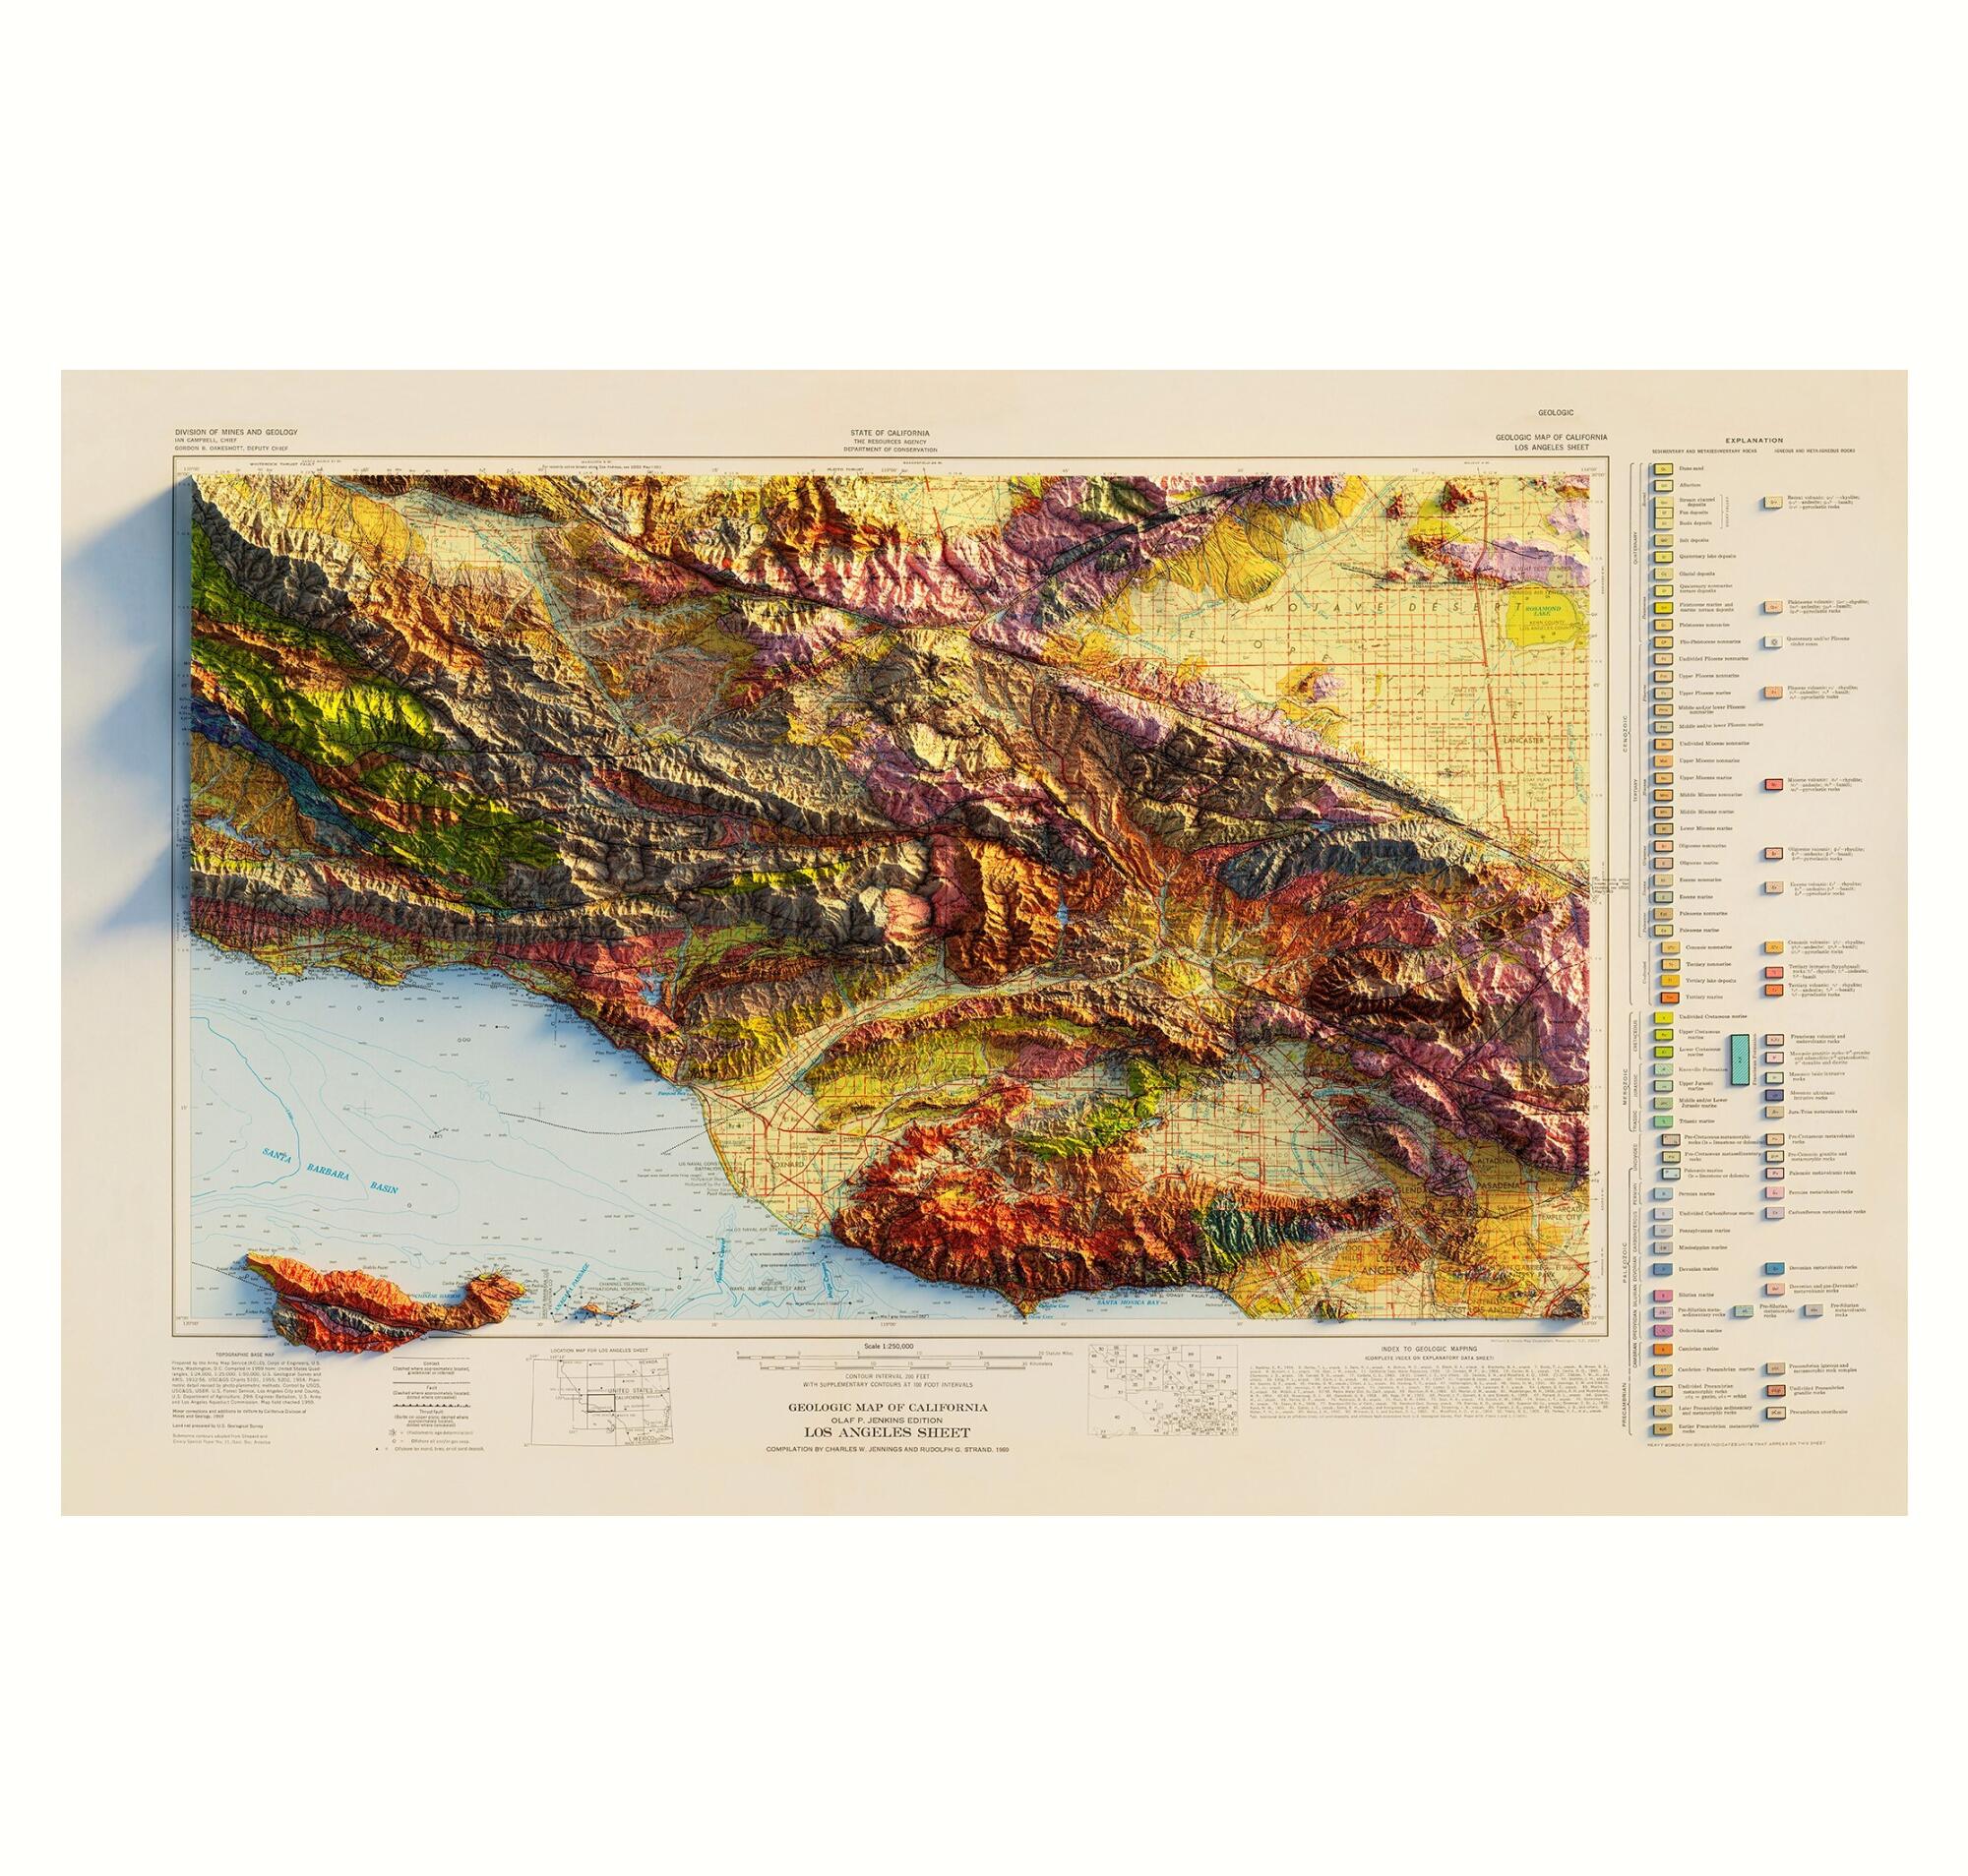 A 1969 geologic map of Los Angeles